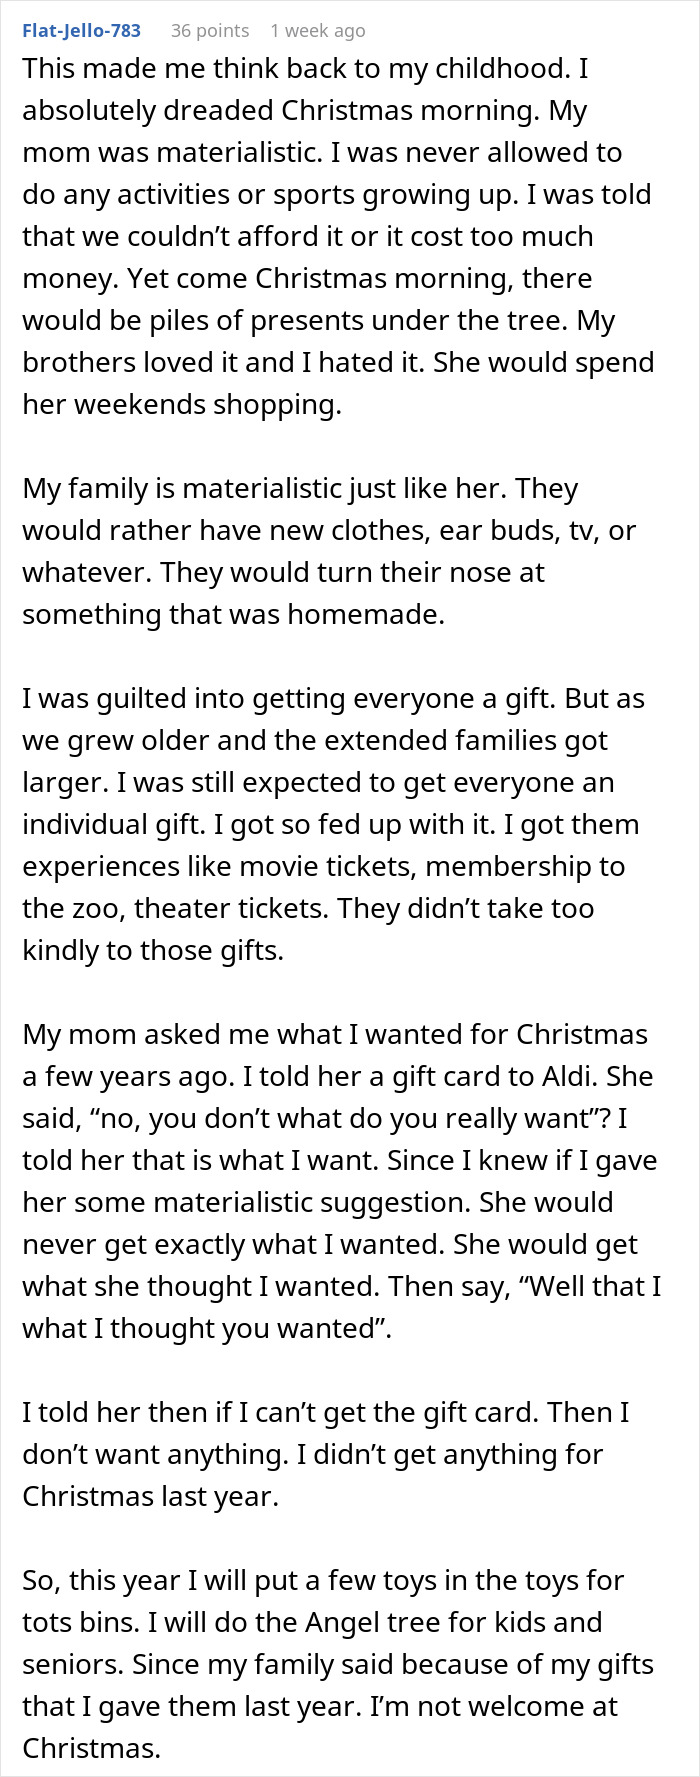 “Gifting In America Has Become Insane”: Woman Shares Her New Gift ...